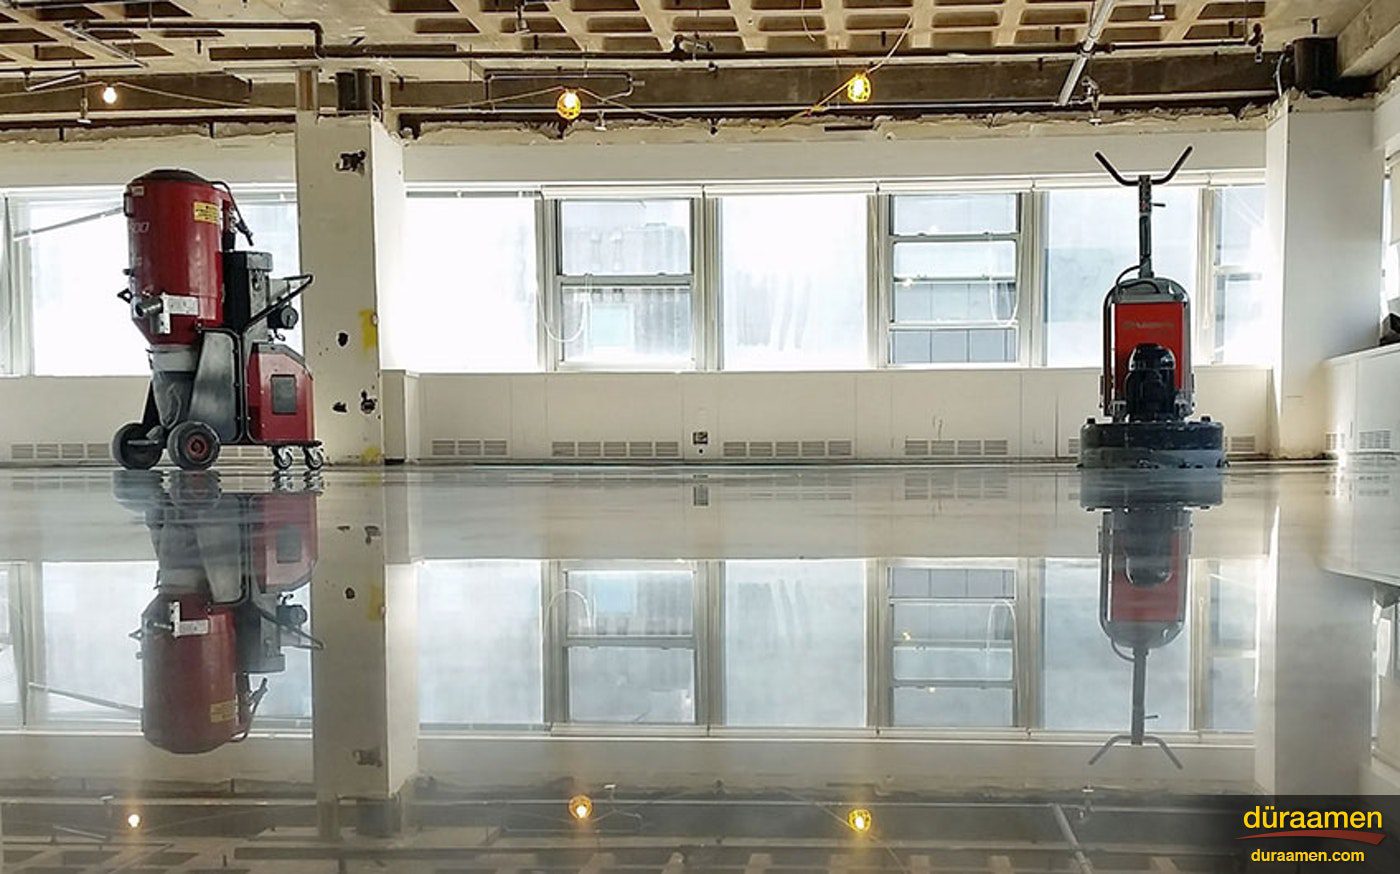 Diamond grinding machines in a NYC office space ready to complete the polishing of the newly installed polished concrete floor Polished Concrete In Process | Duraamen Engineered Products Inc